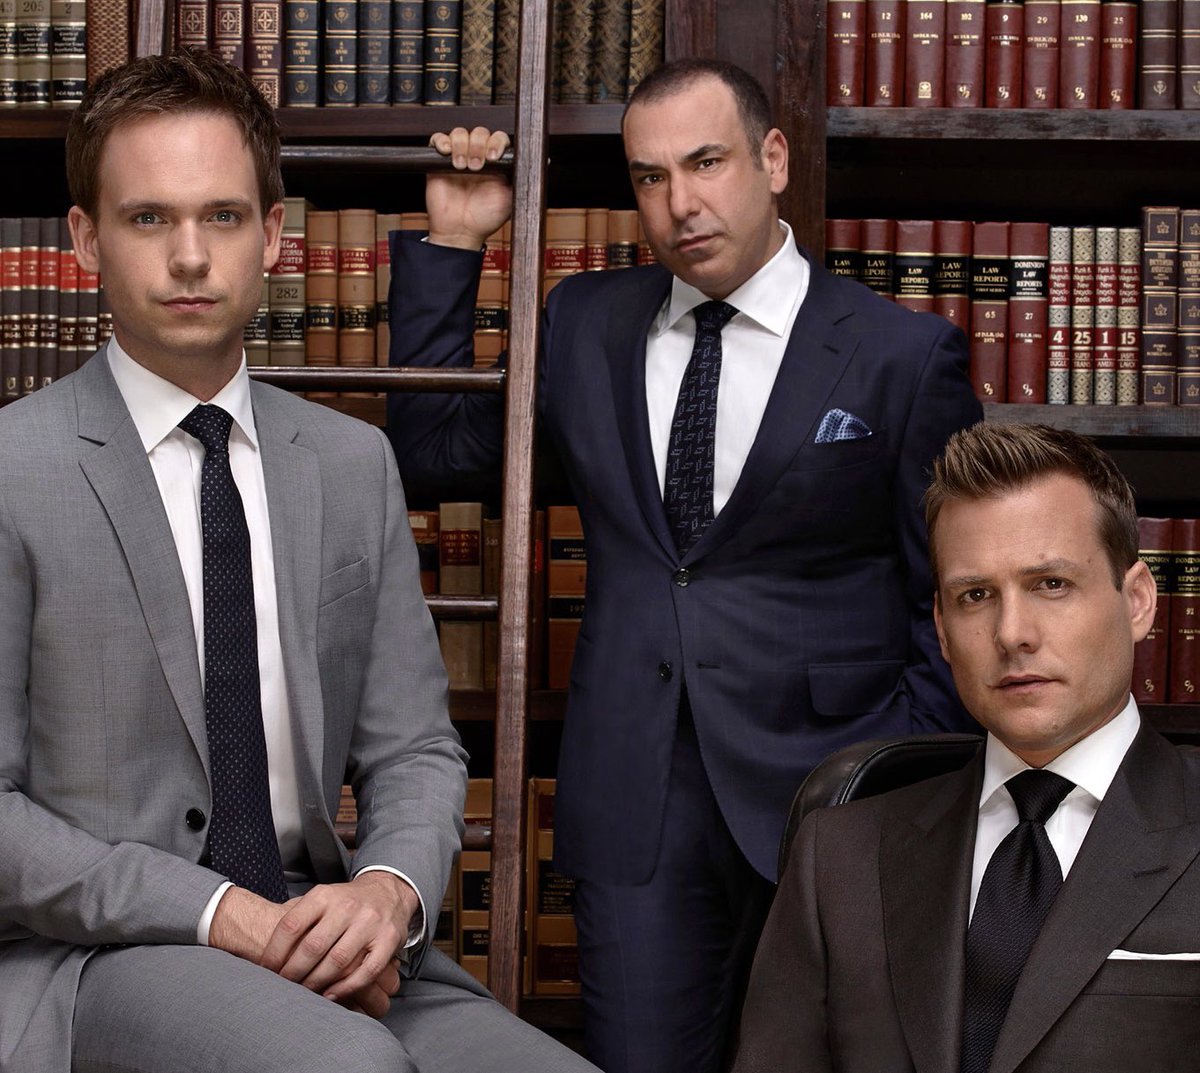 ‘SUITS’ has become the first ever series to cross 3 billion minutes viewed over 7 weeks in a row, according to Nielsen.

Due to Netflix refusing to make a fair deal with SAG and WGA, those involved in ‘SUITS’ will receive little to no streaming residuals for their work.